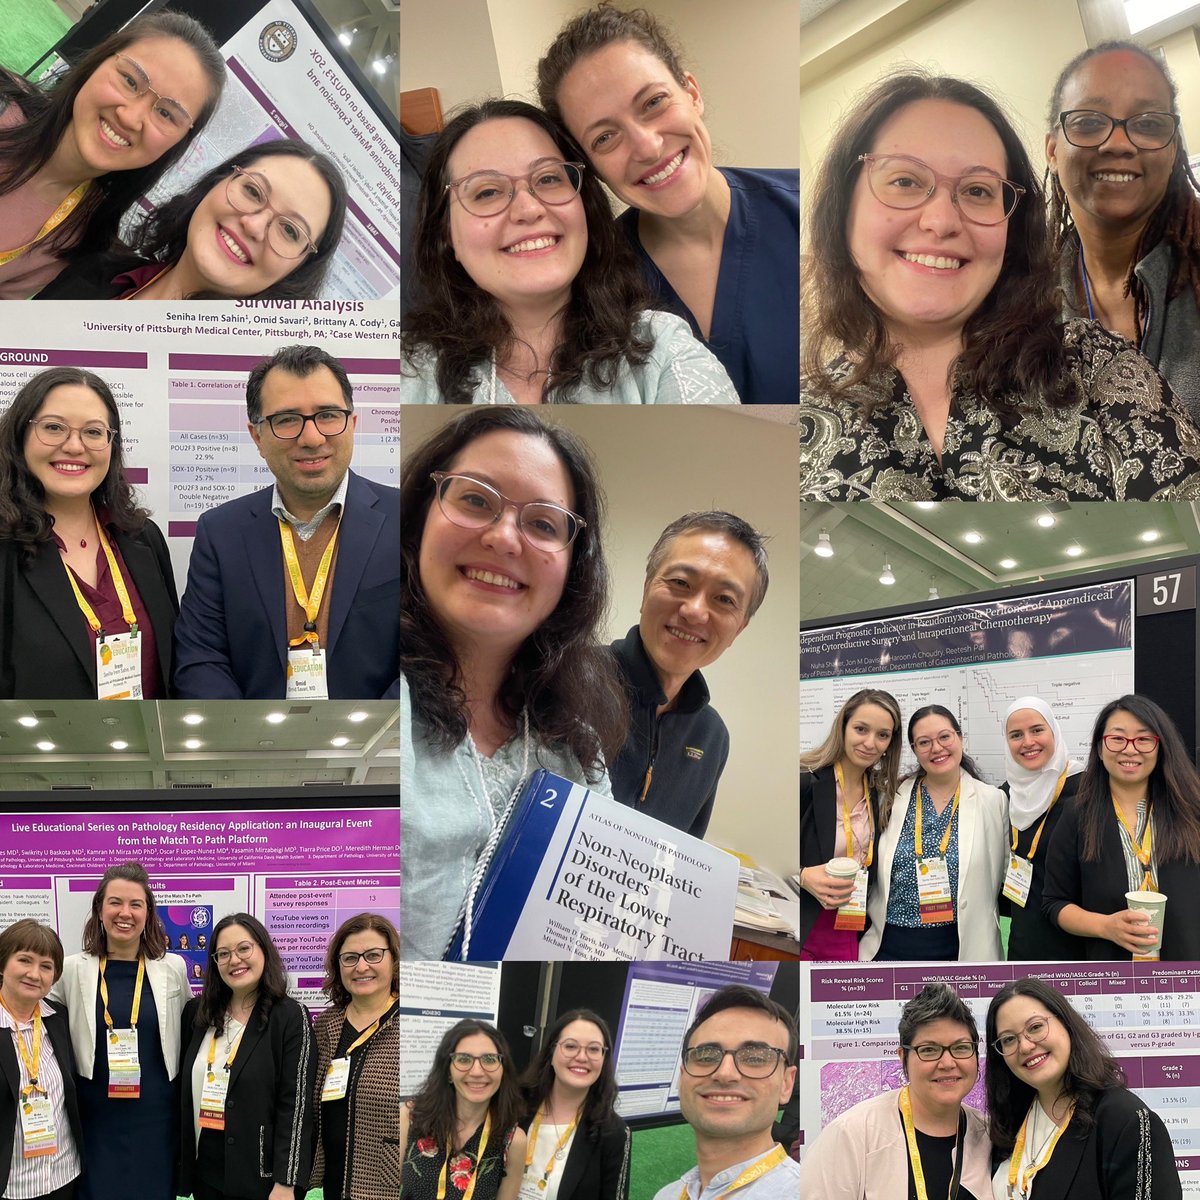 Officially, my last day @UPMCPathology ! 🌸 I am forever grateful for the people that this year brought into my life and for the invaluable experiences and knowledge I gained 💜 Farewell until our paths cross again (hopefully soon) 🥰